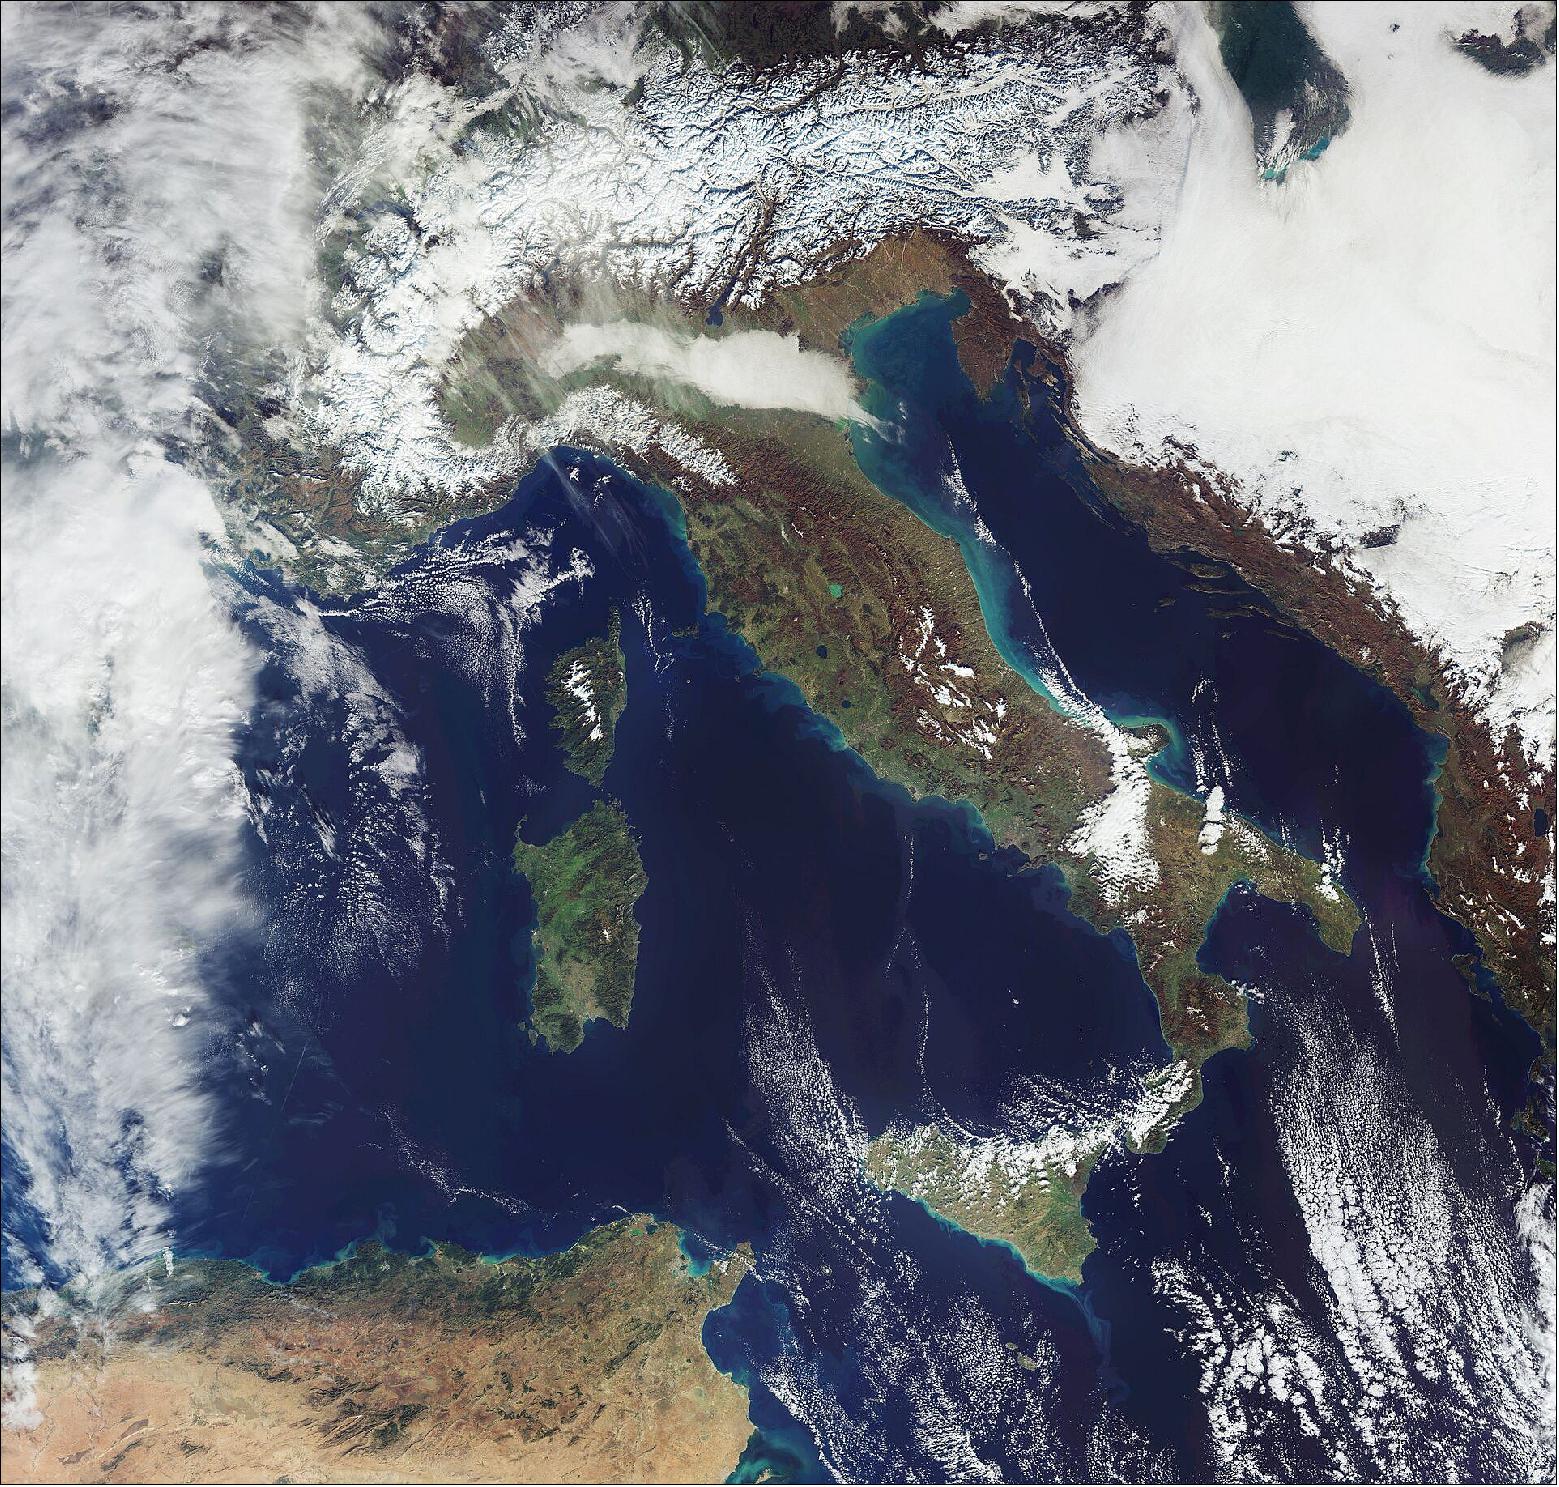 Figure 41: Heavy snowfall in the Alps has been recorded over the past weeks, with up to 3 m of snow recorded in some parts of the Austrian and Italian Alps. On 14 December, the OLCI (Ocean and Land Color Instrument) onboard the Sentinel-3 mission acquired this image of snow cover and low cloud coverage around the Alps. According to EUMETSAT, the snow came in two bouts. The first occurred during the weekend of 5-6 December and was stronger, influencing the western part of the Alps, while the second, on 8 and 9 December, brought snow to central and eastern Alps, and was not as abundant as the first. The skies then cleared after 10 December, allowing this image to be captured. The first bout of snow lead to road blocks, power outages throughout South Tyrol and avalanche warnings, according to Der Spiegel (image credit: ESA, the image contains modified Copernicus Sentinel data (2020), processed by ESA, CC BY-SA 3.0 IGO)